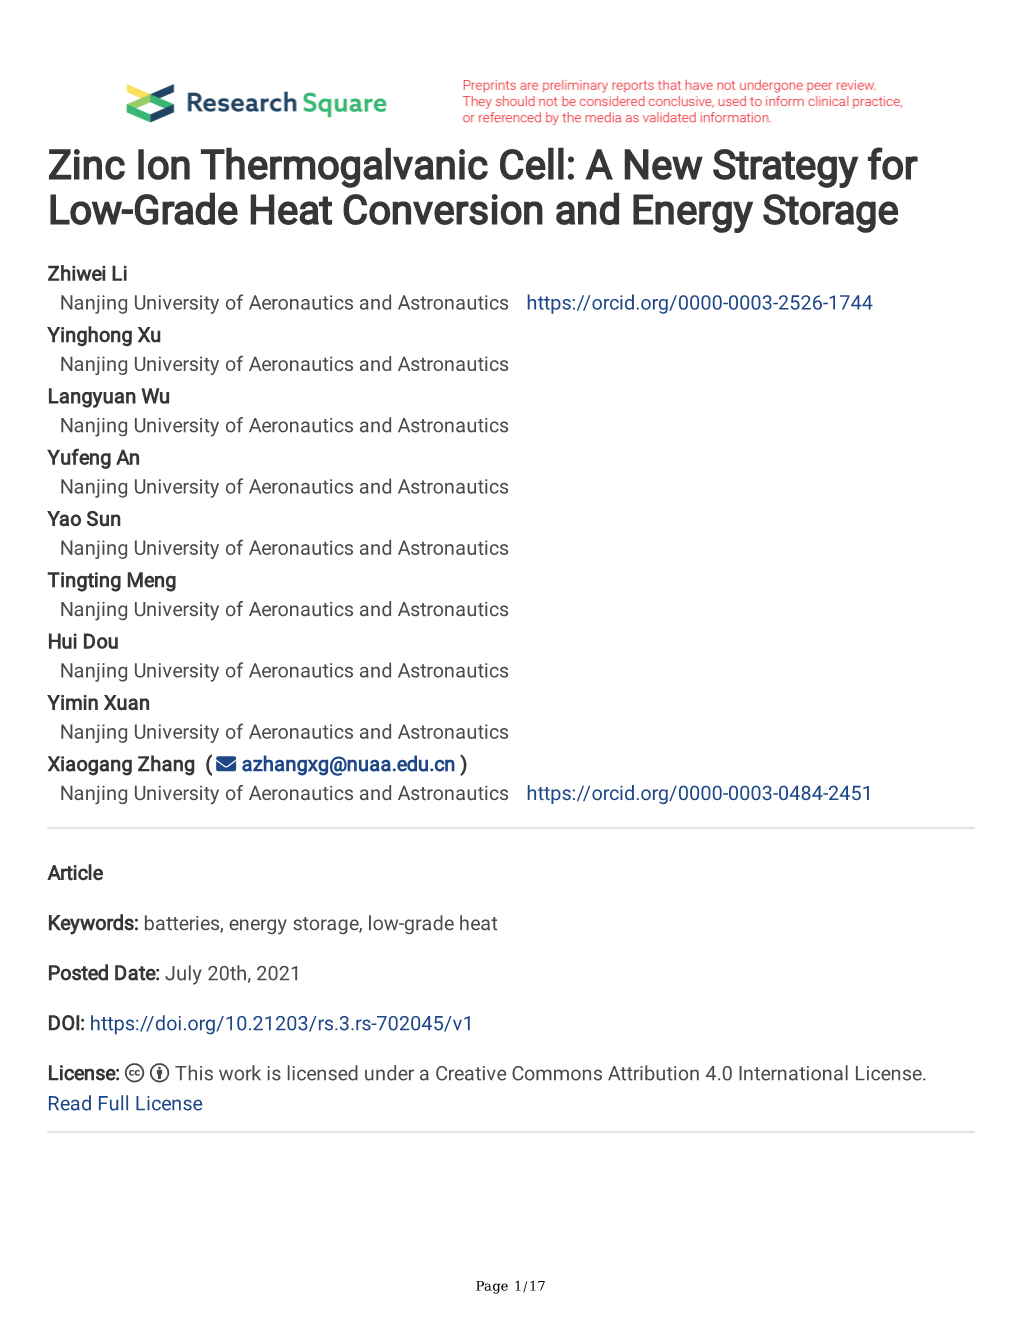 Zinc Ion Thermogalvanic Cell: a New Strategy for Low-Grade Heat Conversion and Energy Storage